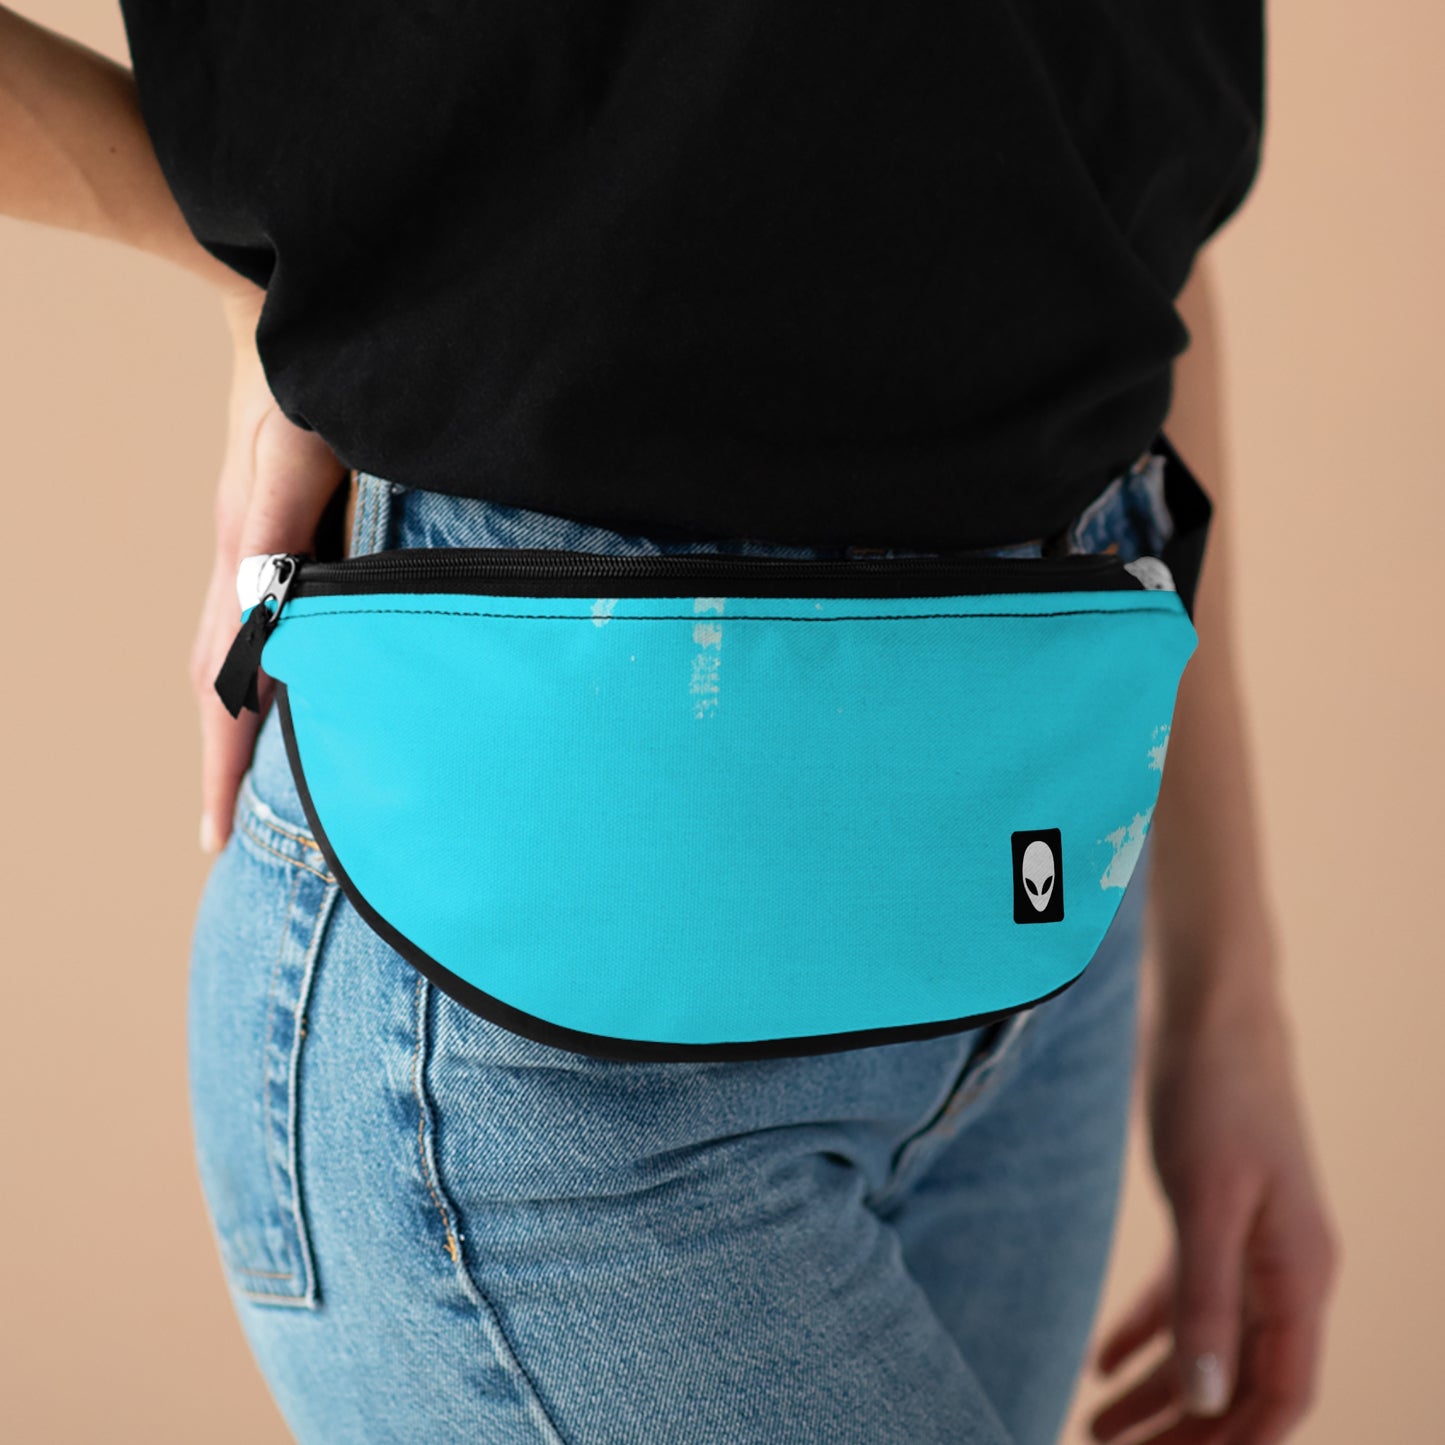 "A Breezy Skyscape: A Combination of Tradition and Modernity"- The Alien Fanny Pack